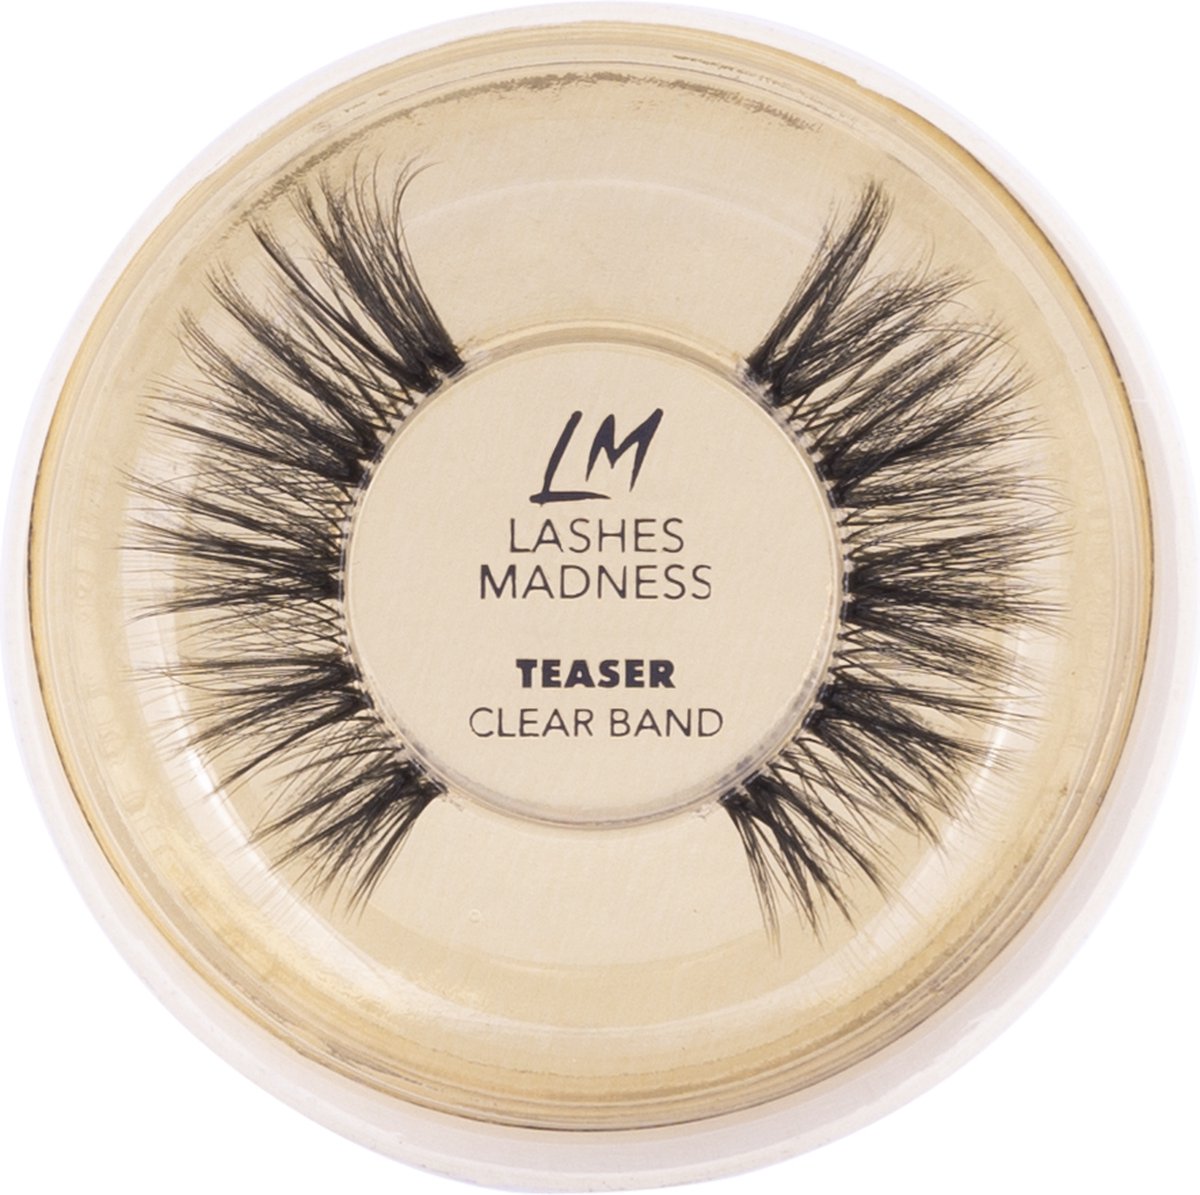 Lashes Madness - TEASER - Clear Band - Vegan Mink Lashes - Wimpers - Valse Wimpers - Eyelashes - Luxe Wimpers